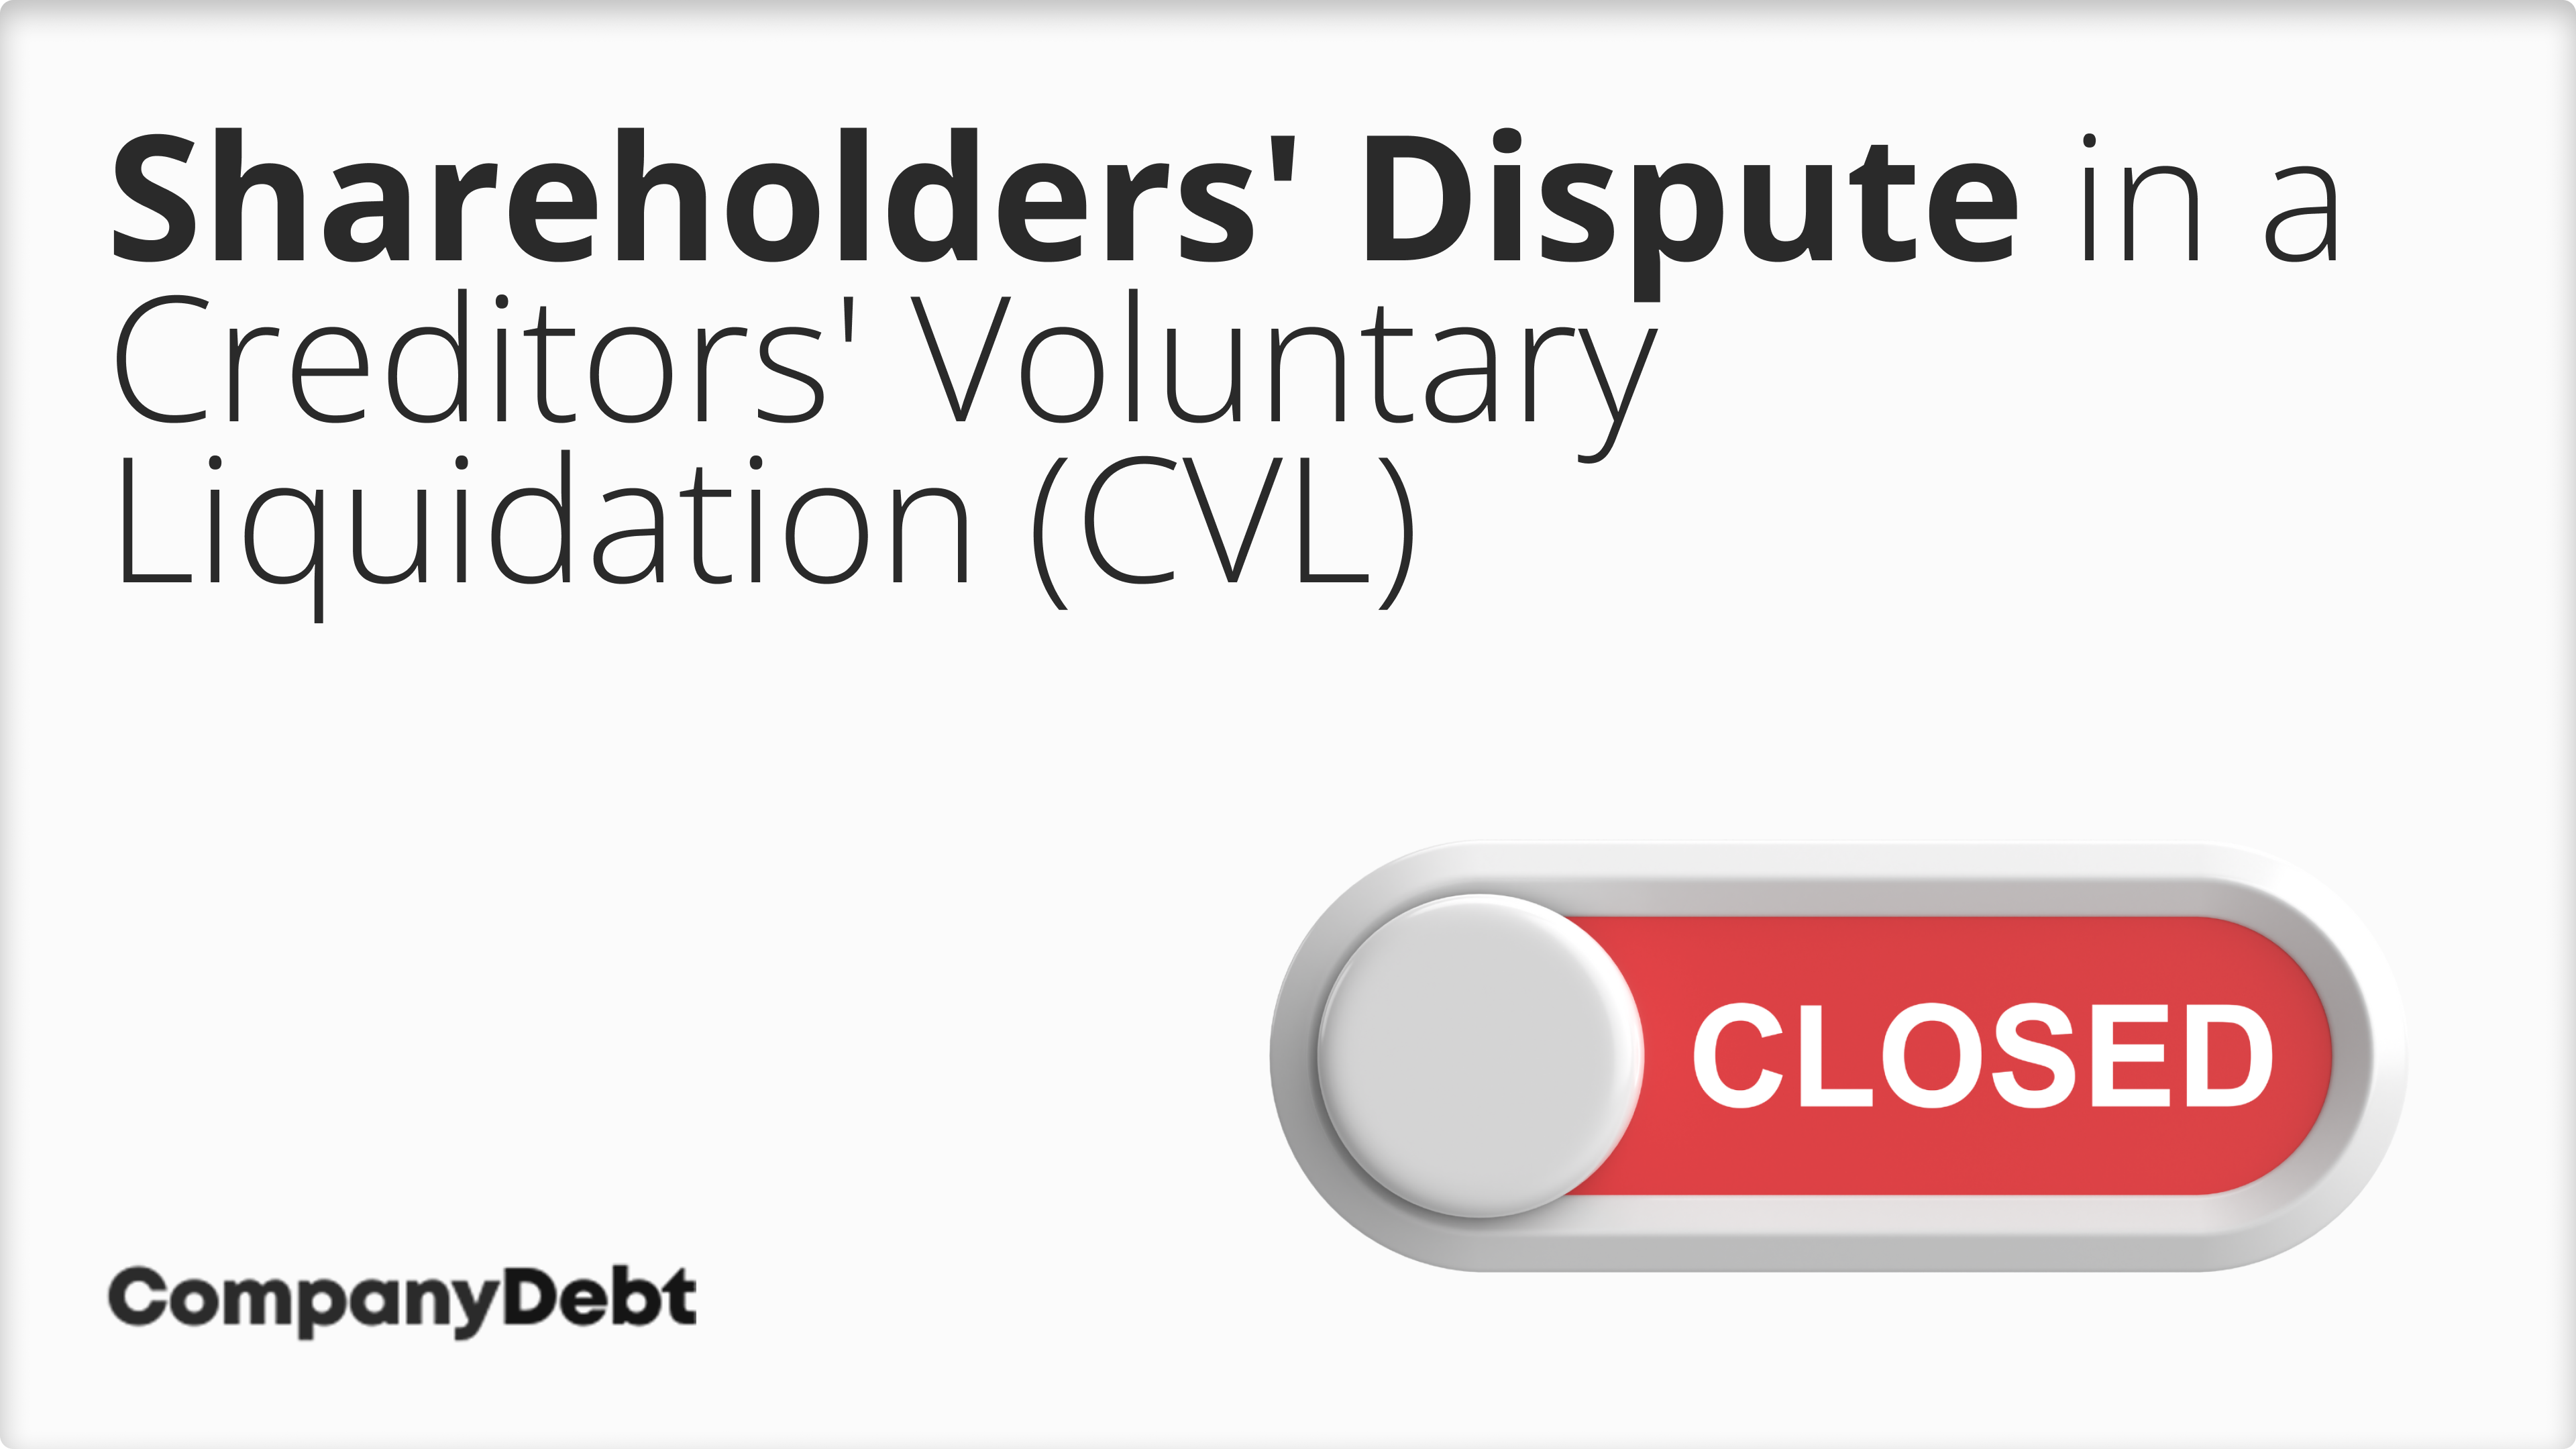 What-if-Theres-a-Shareholders-Dispute-in-a-Creditors-Voluntary-Liquidation-CVL_